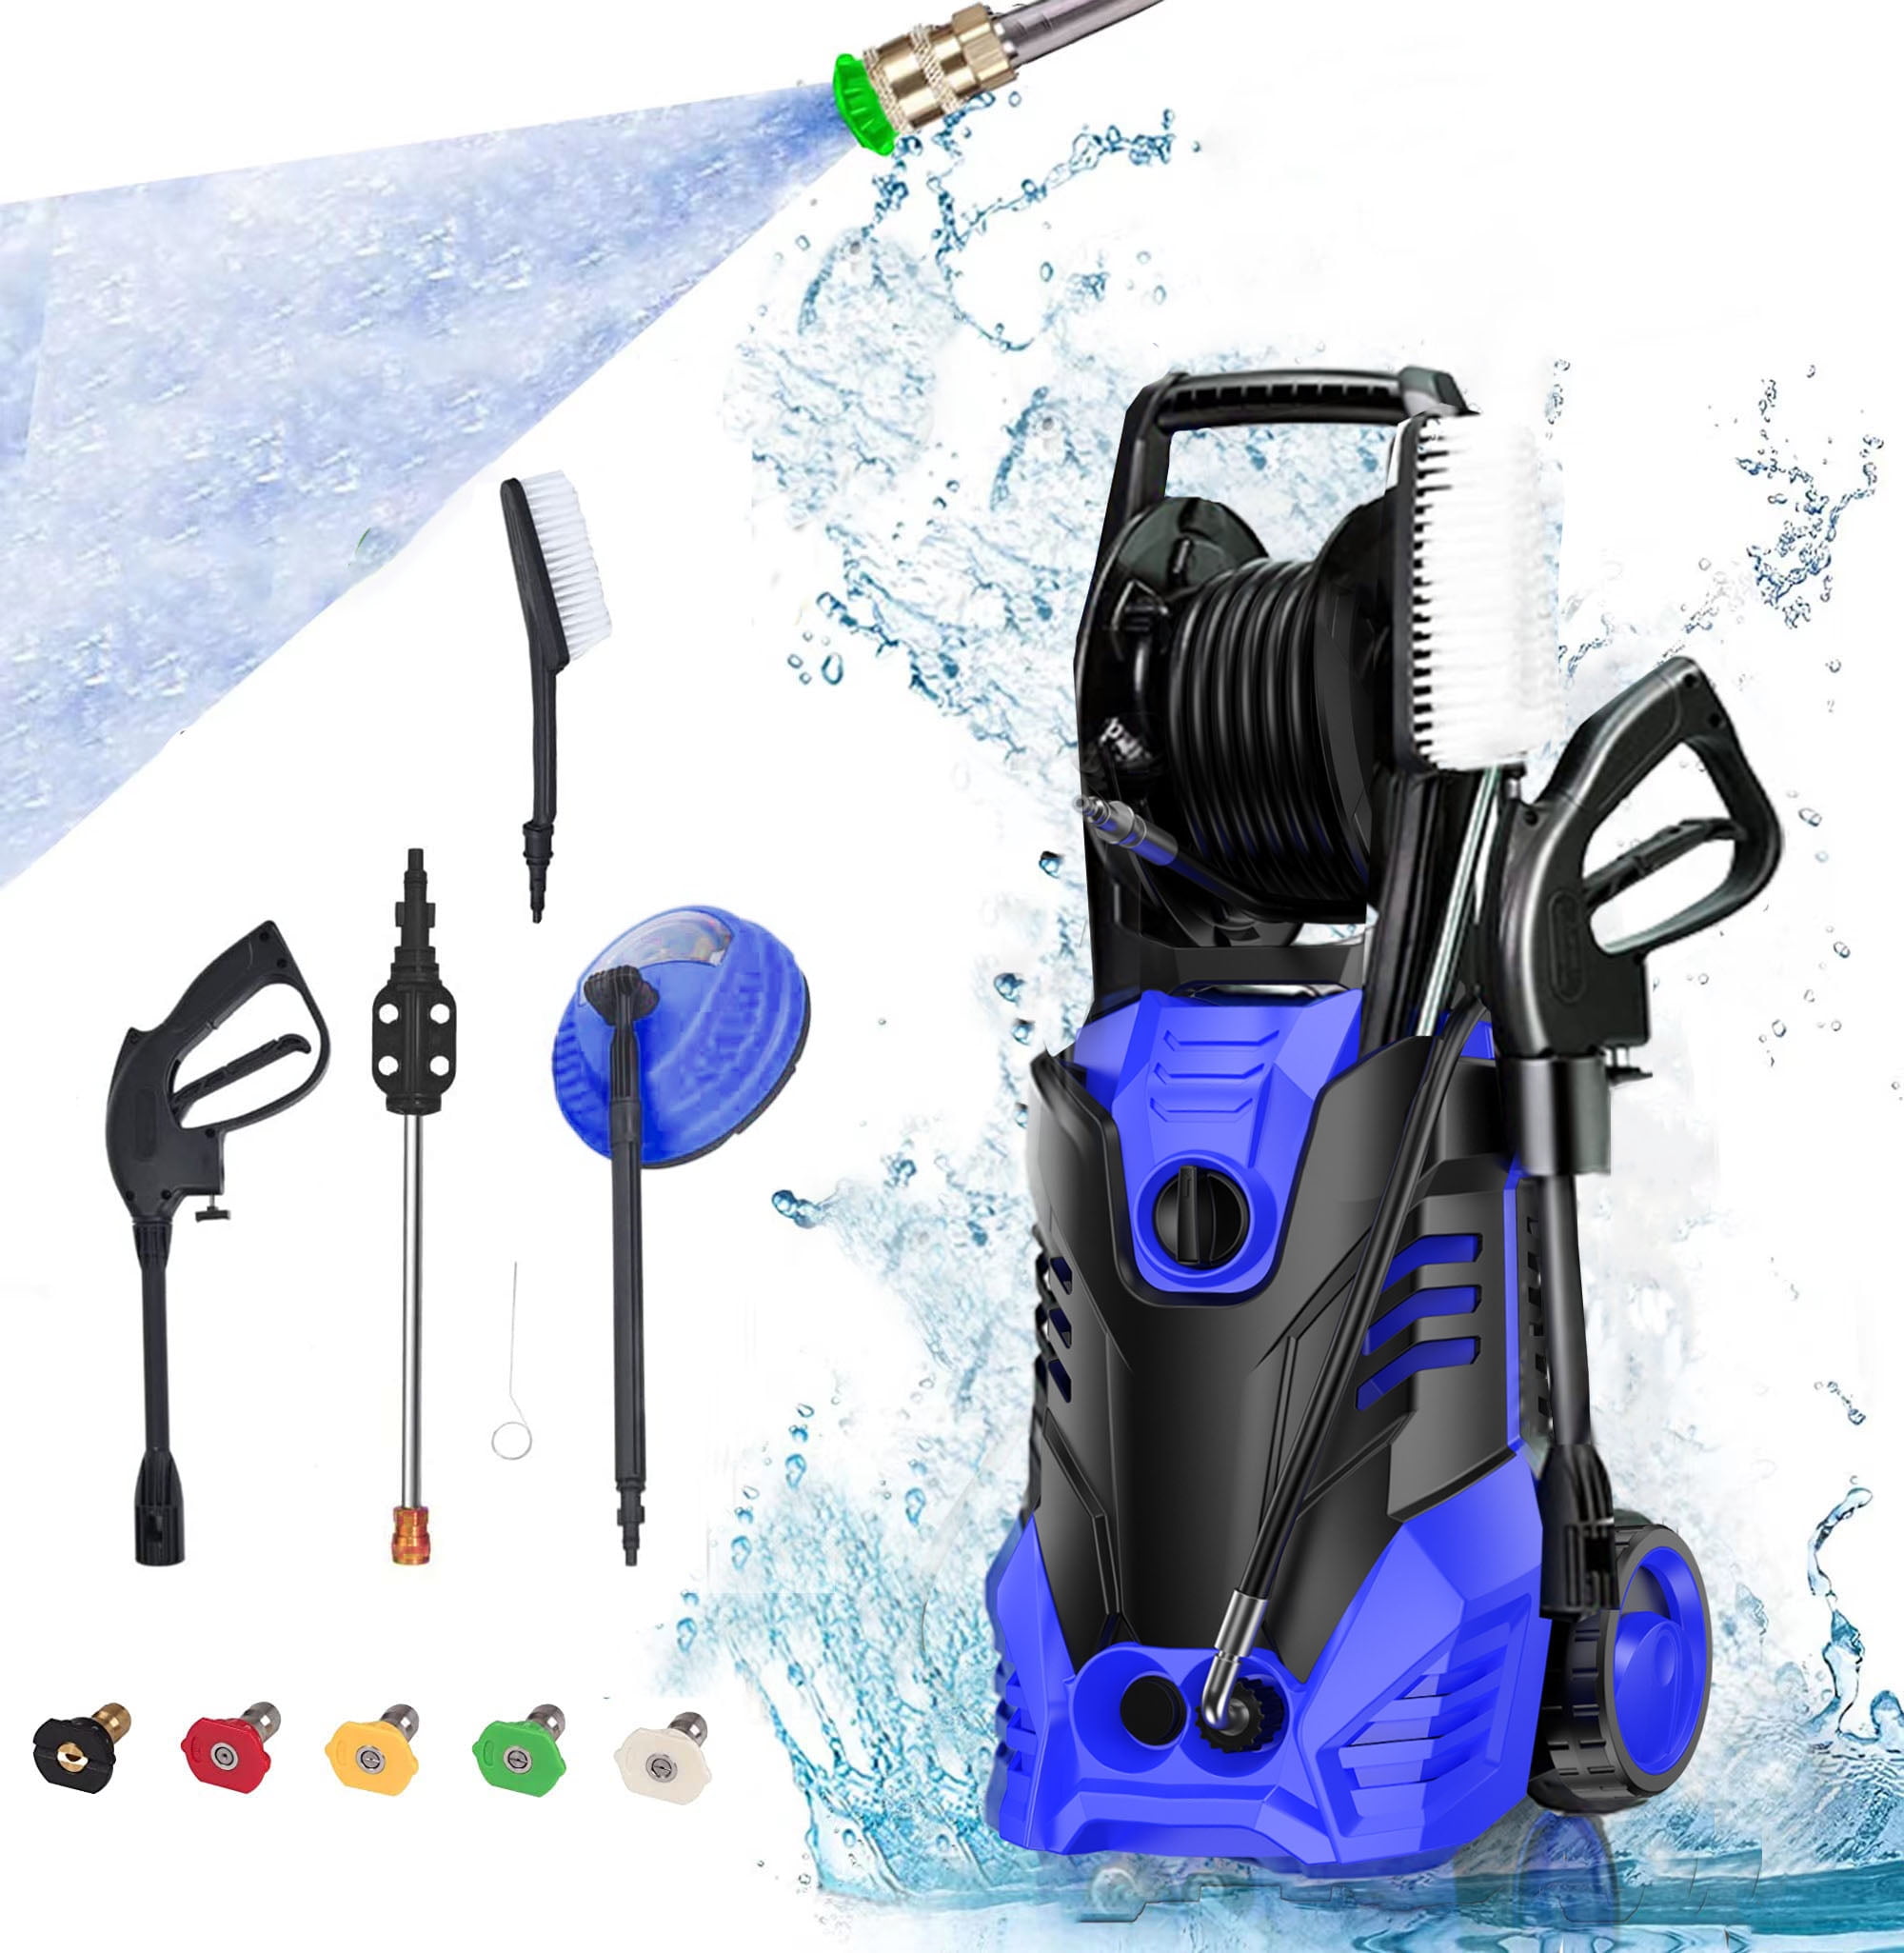 Electric Pressure Washer - 2600 PSI Pressure Washer, 2.0 GPM Electric Power  Washer 1600W High Pressure Washer with 4 Nozzles, Spray Bottle and Hose